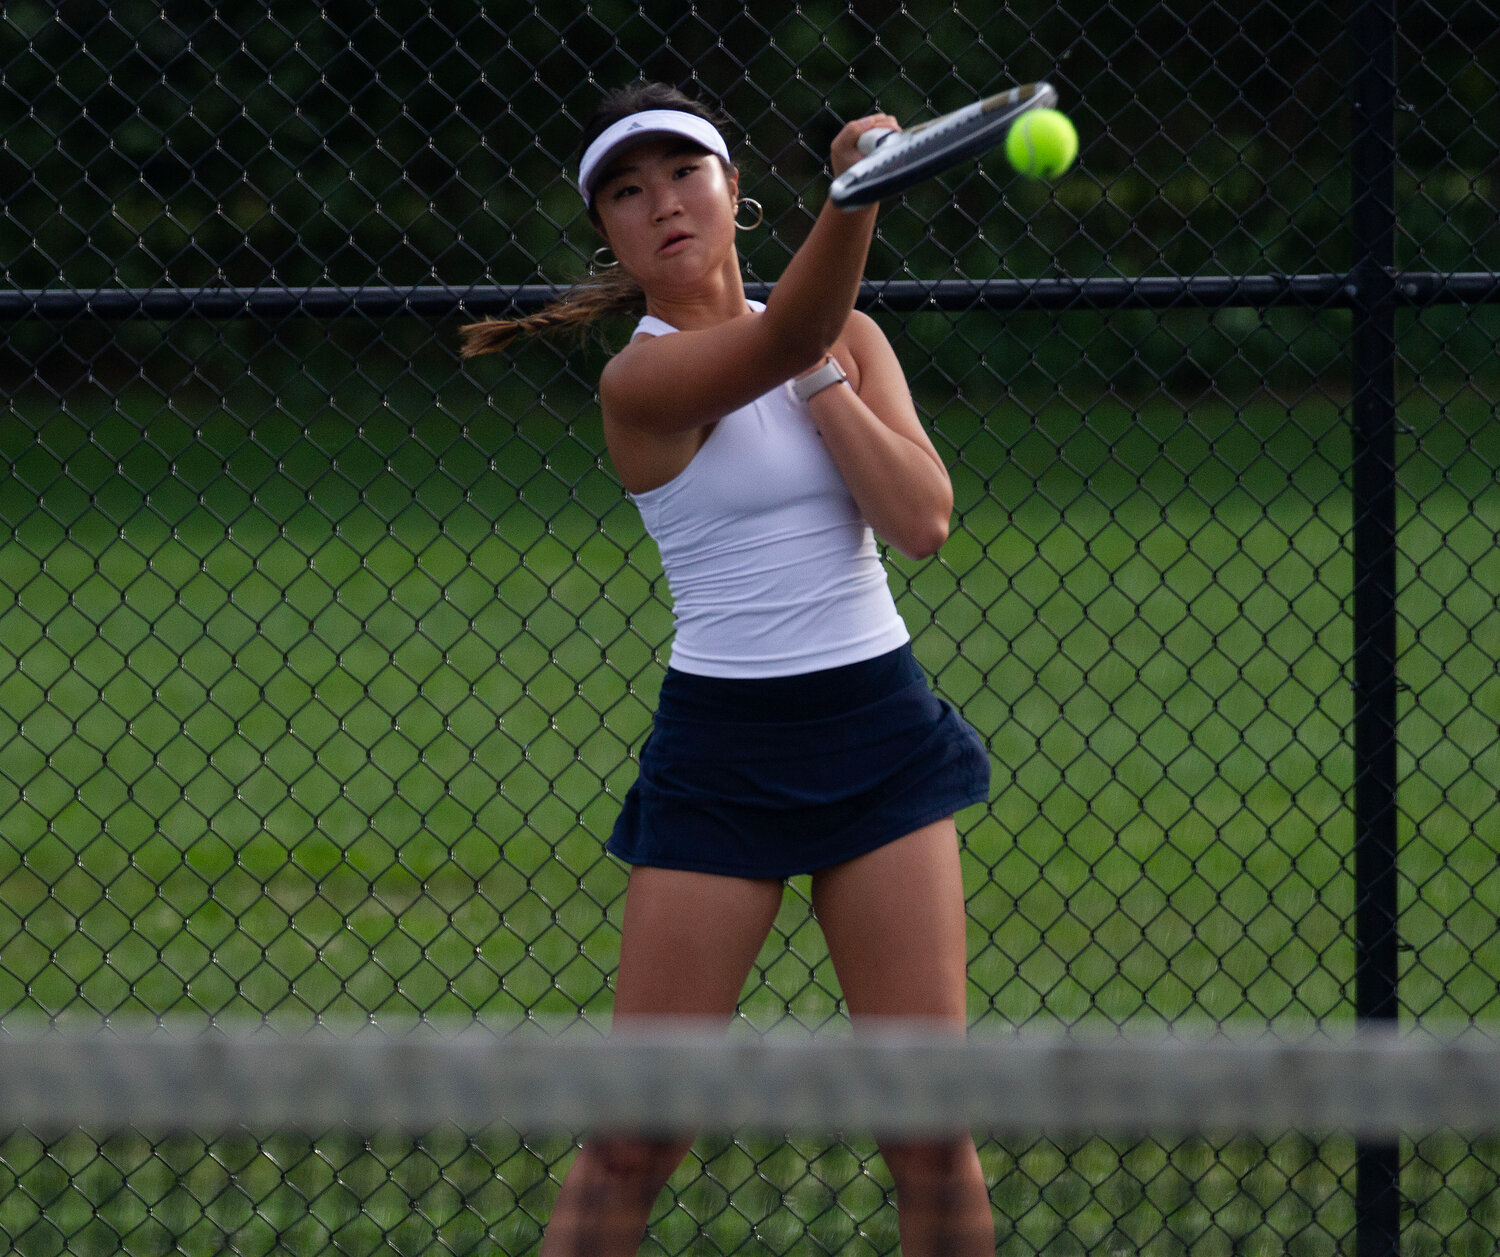 Barrington High School’s number four singles player Charlotte Byon returns a shot during the Eagles’ match against North Kingstown last week.